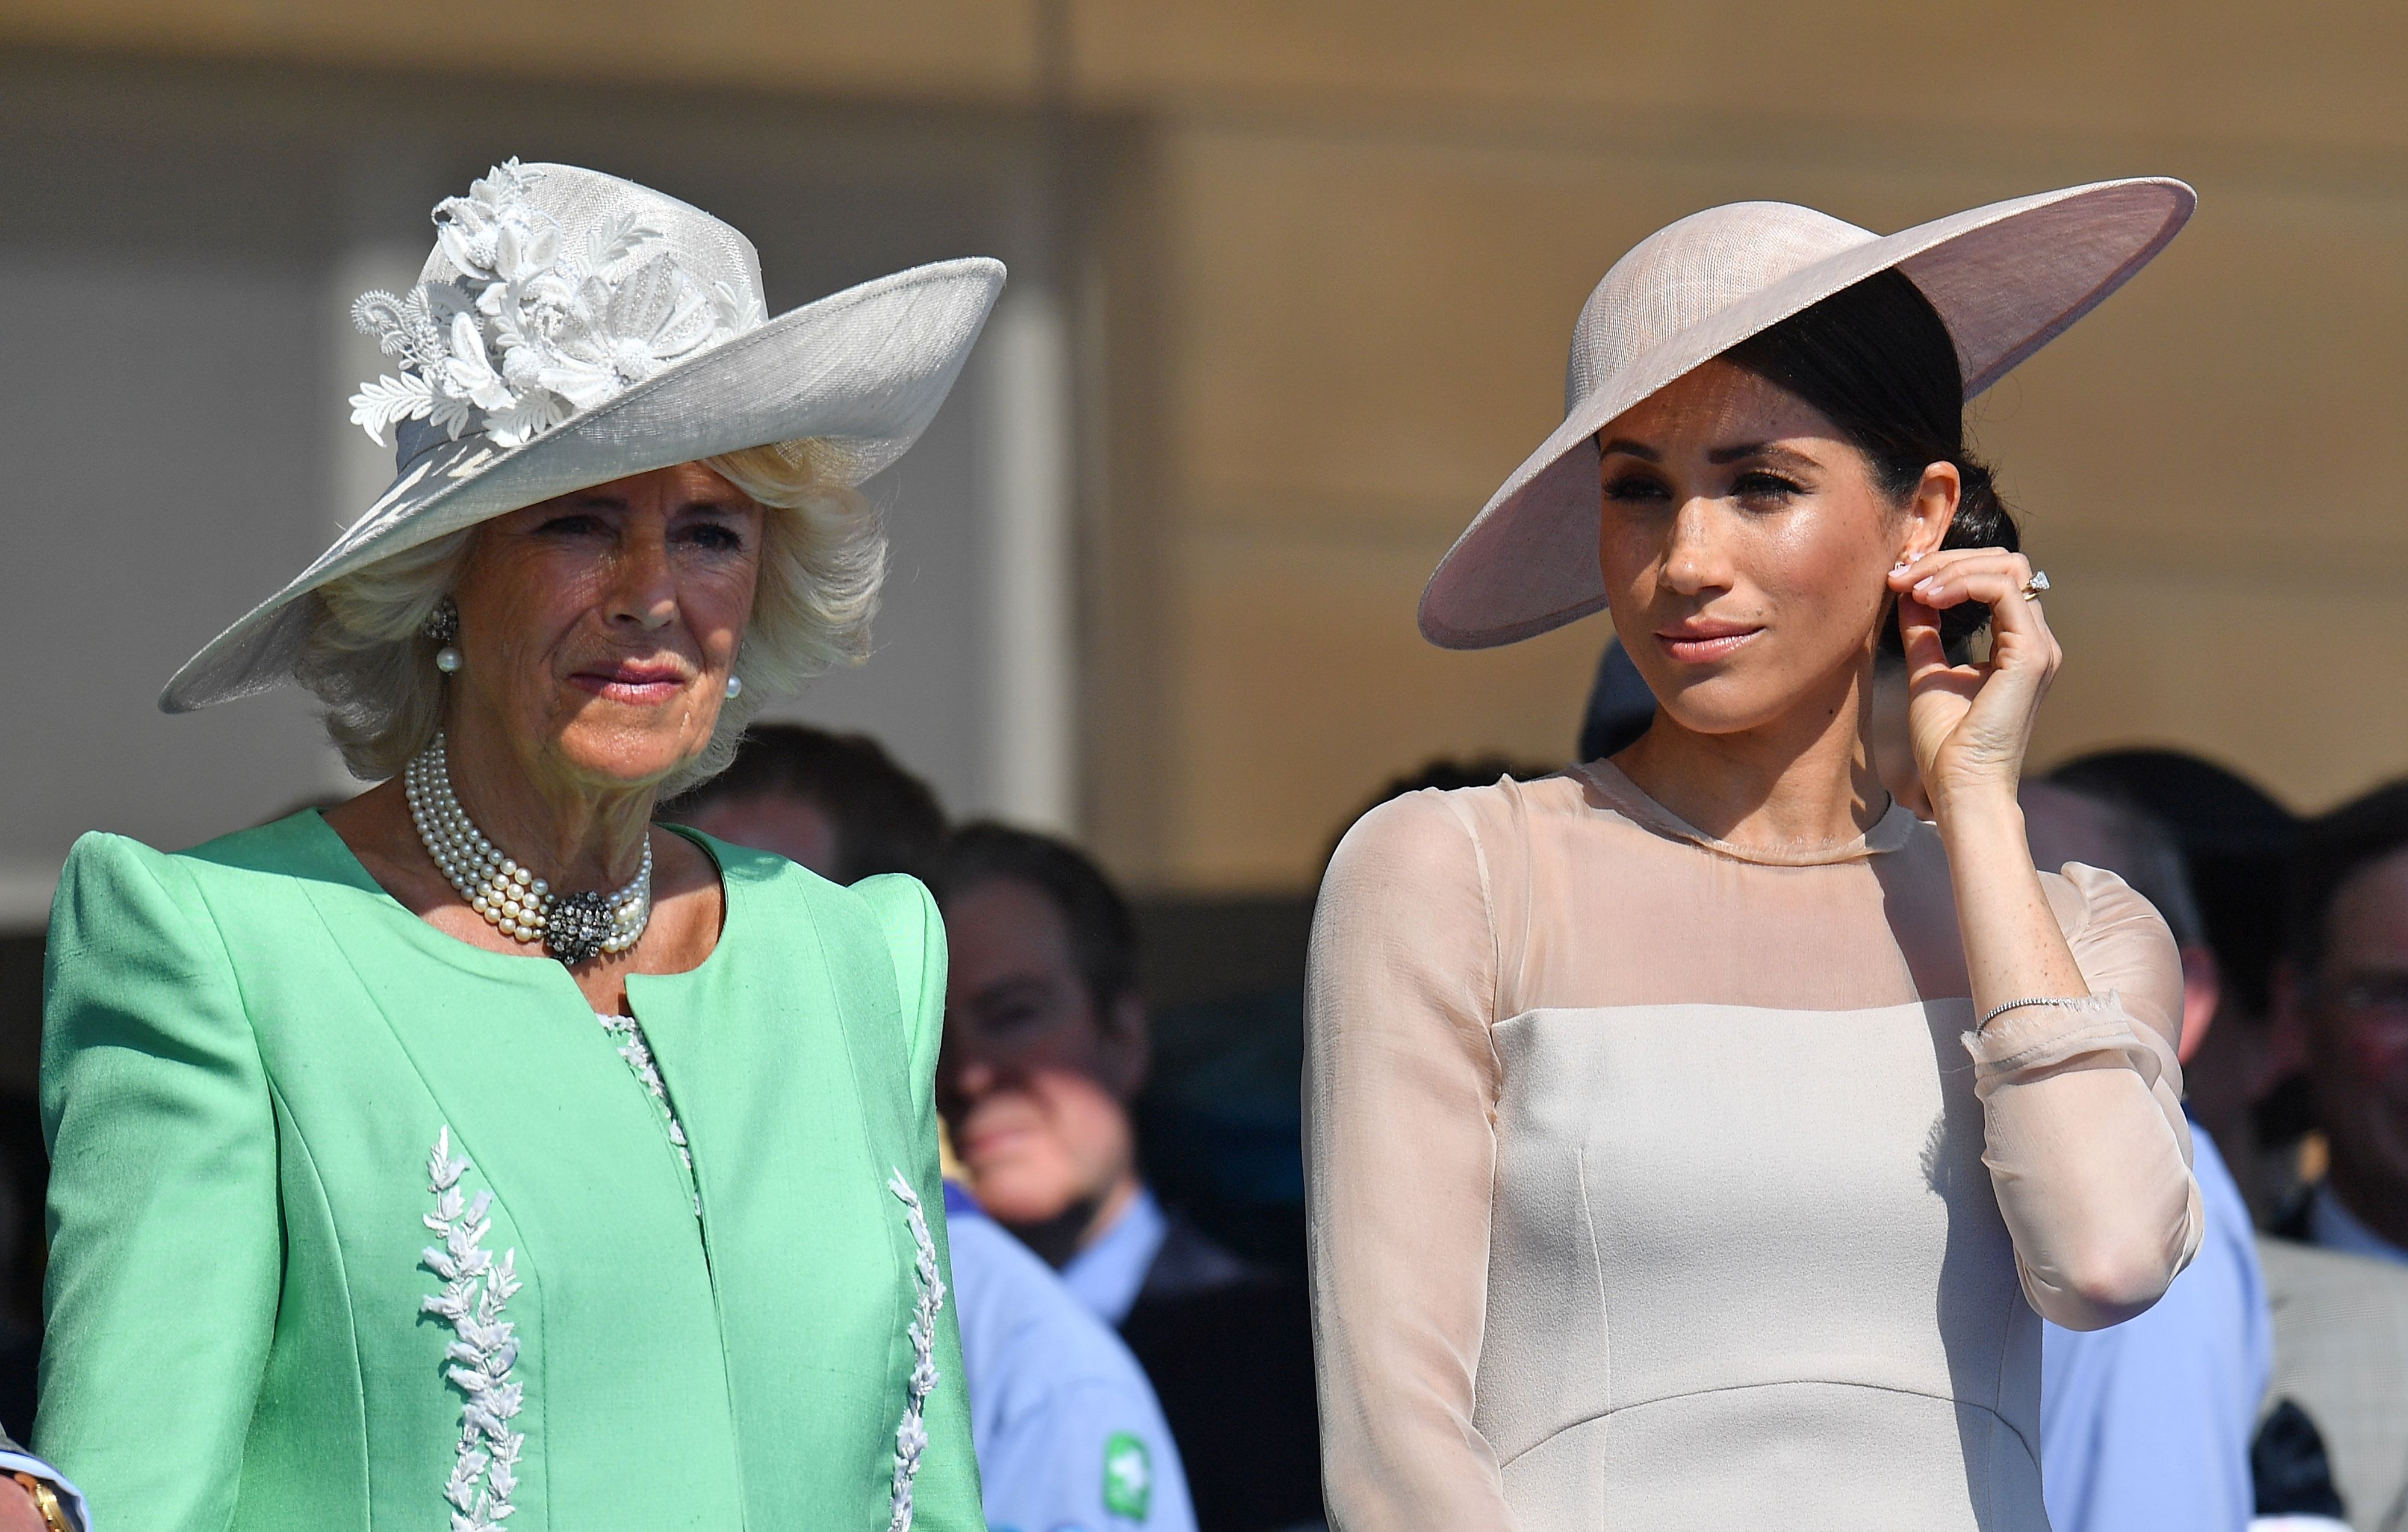 Duchess Camilla and Duchess Meghan at Prince Charles' 70th Birthday Patronage Celebration on May 22, 2018, in London, England. | Source: Getty Images